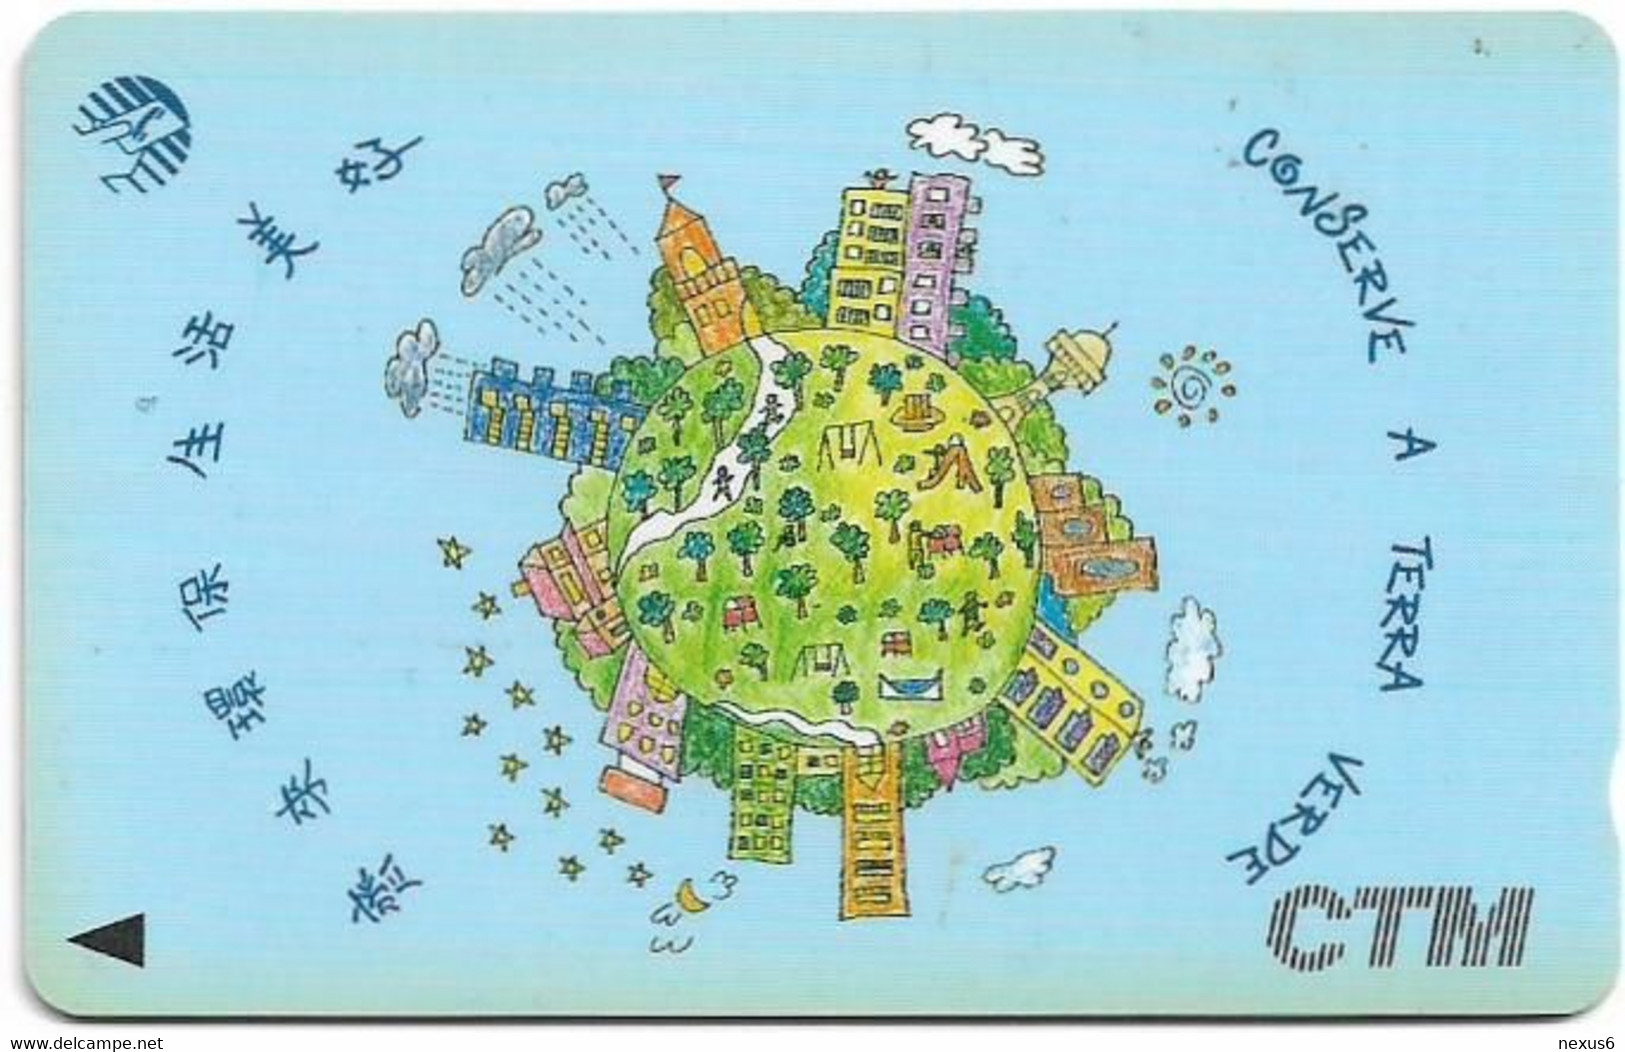 Macau - CTM (GPT) - Environment Protection - Land Conservation - 7MACA - 1992, 15.000ex, Used - Macao